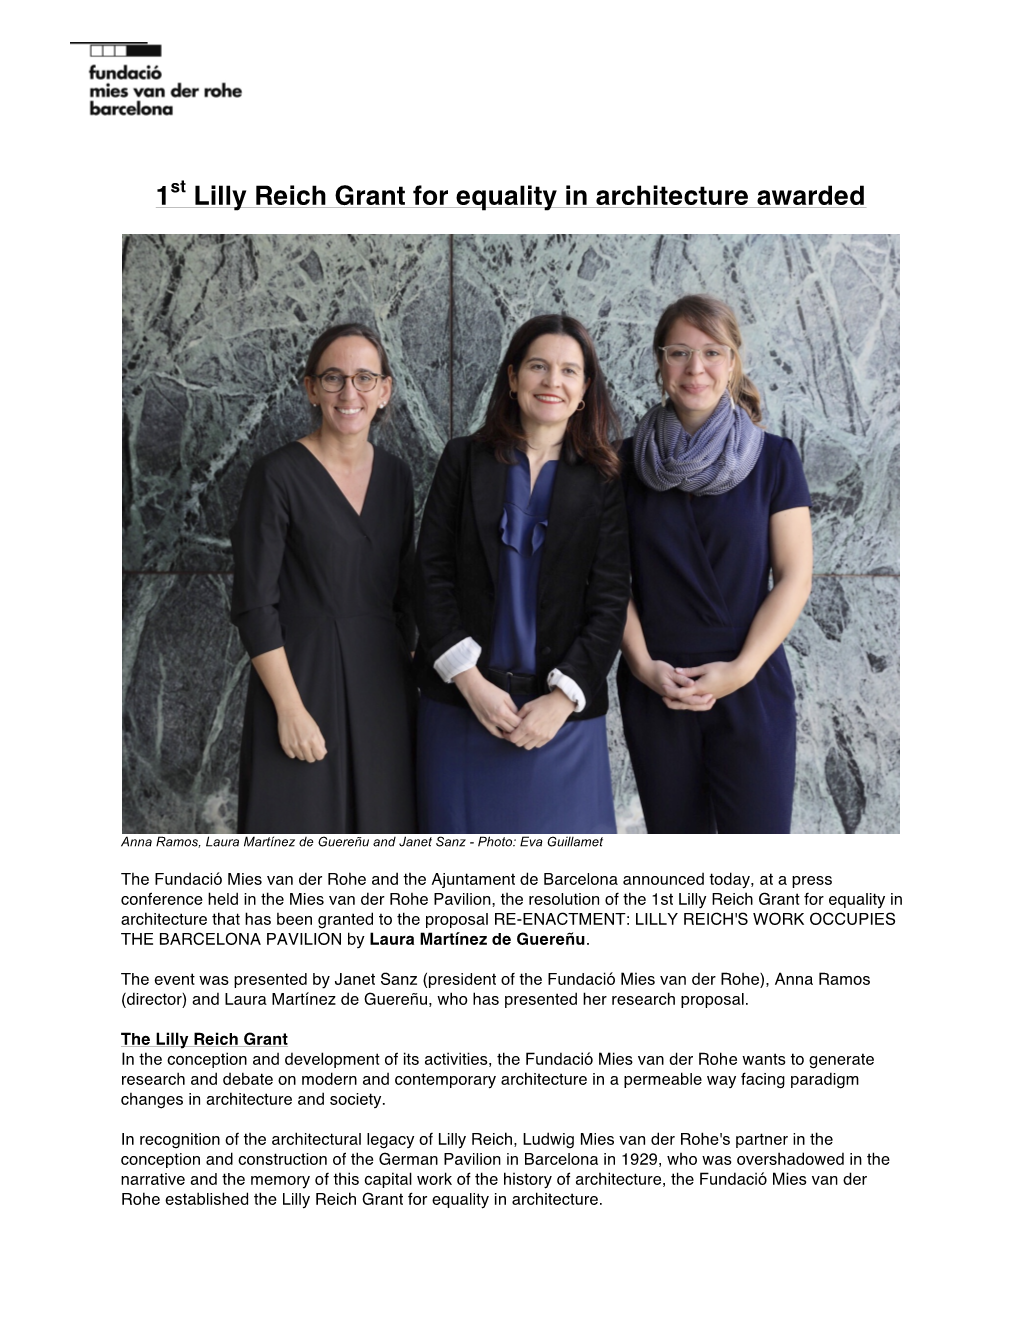 1St Lilly Reich Grant for Equality in Architecture Awarded